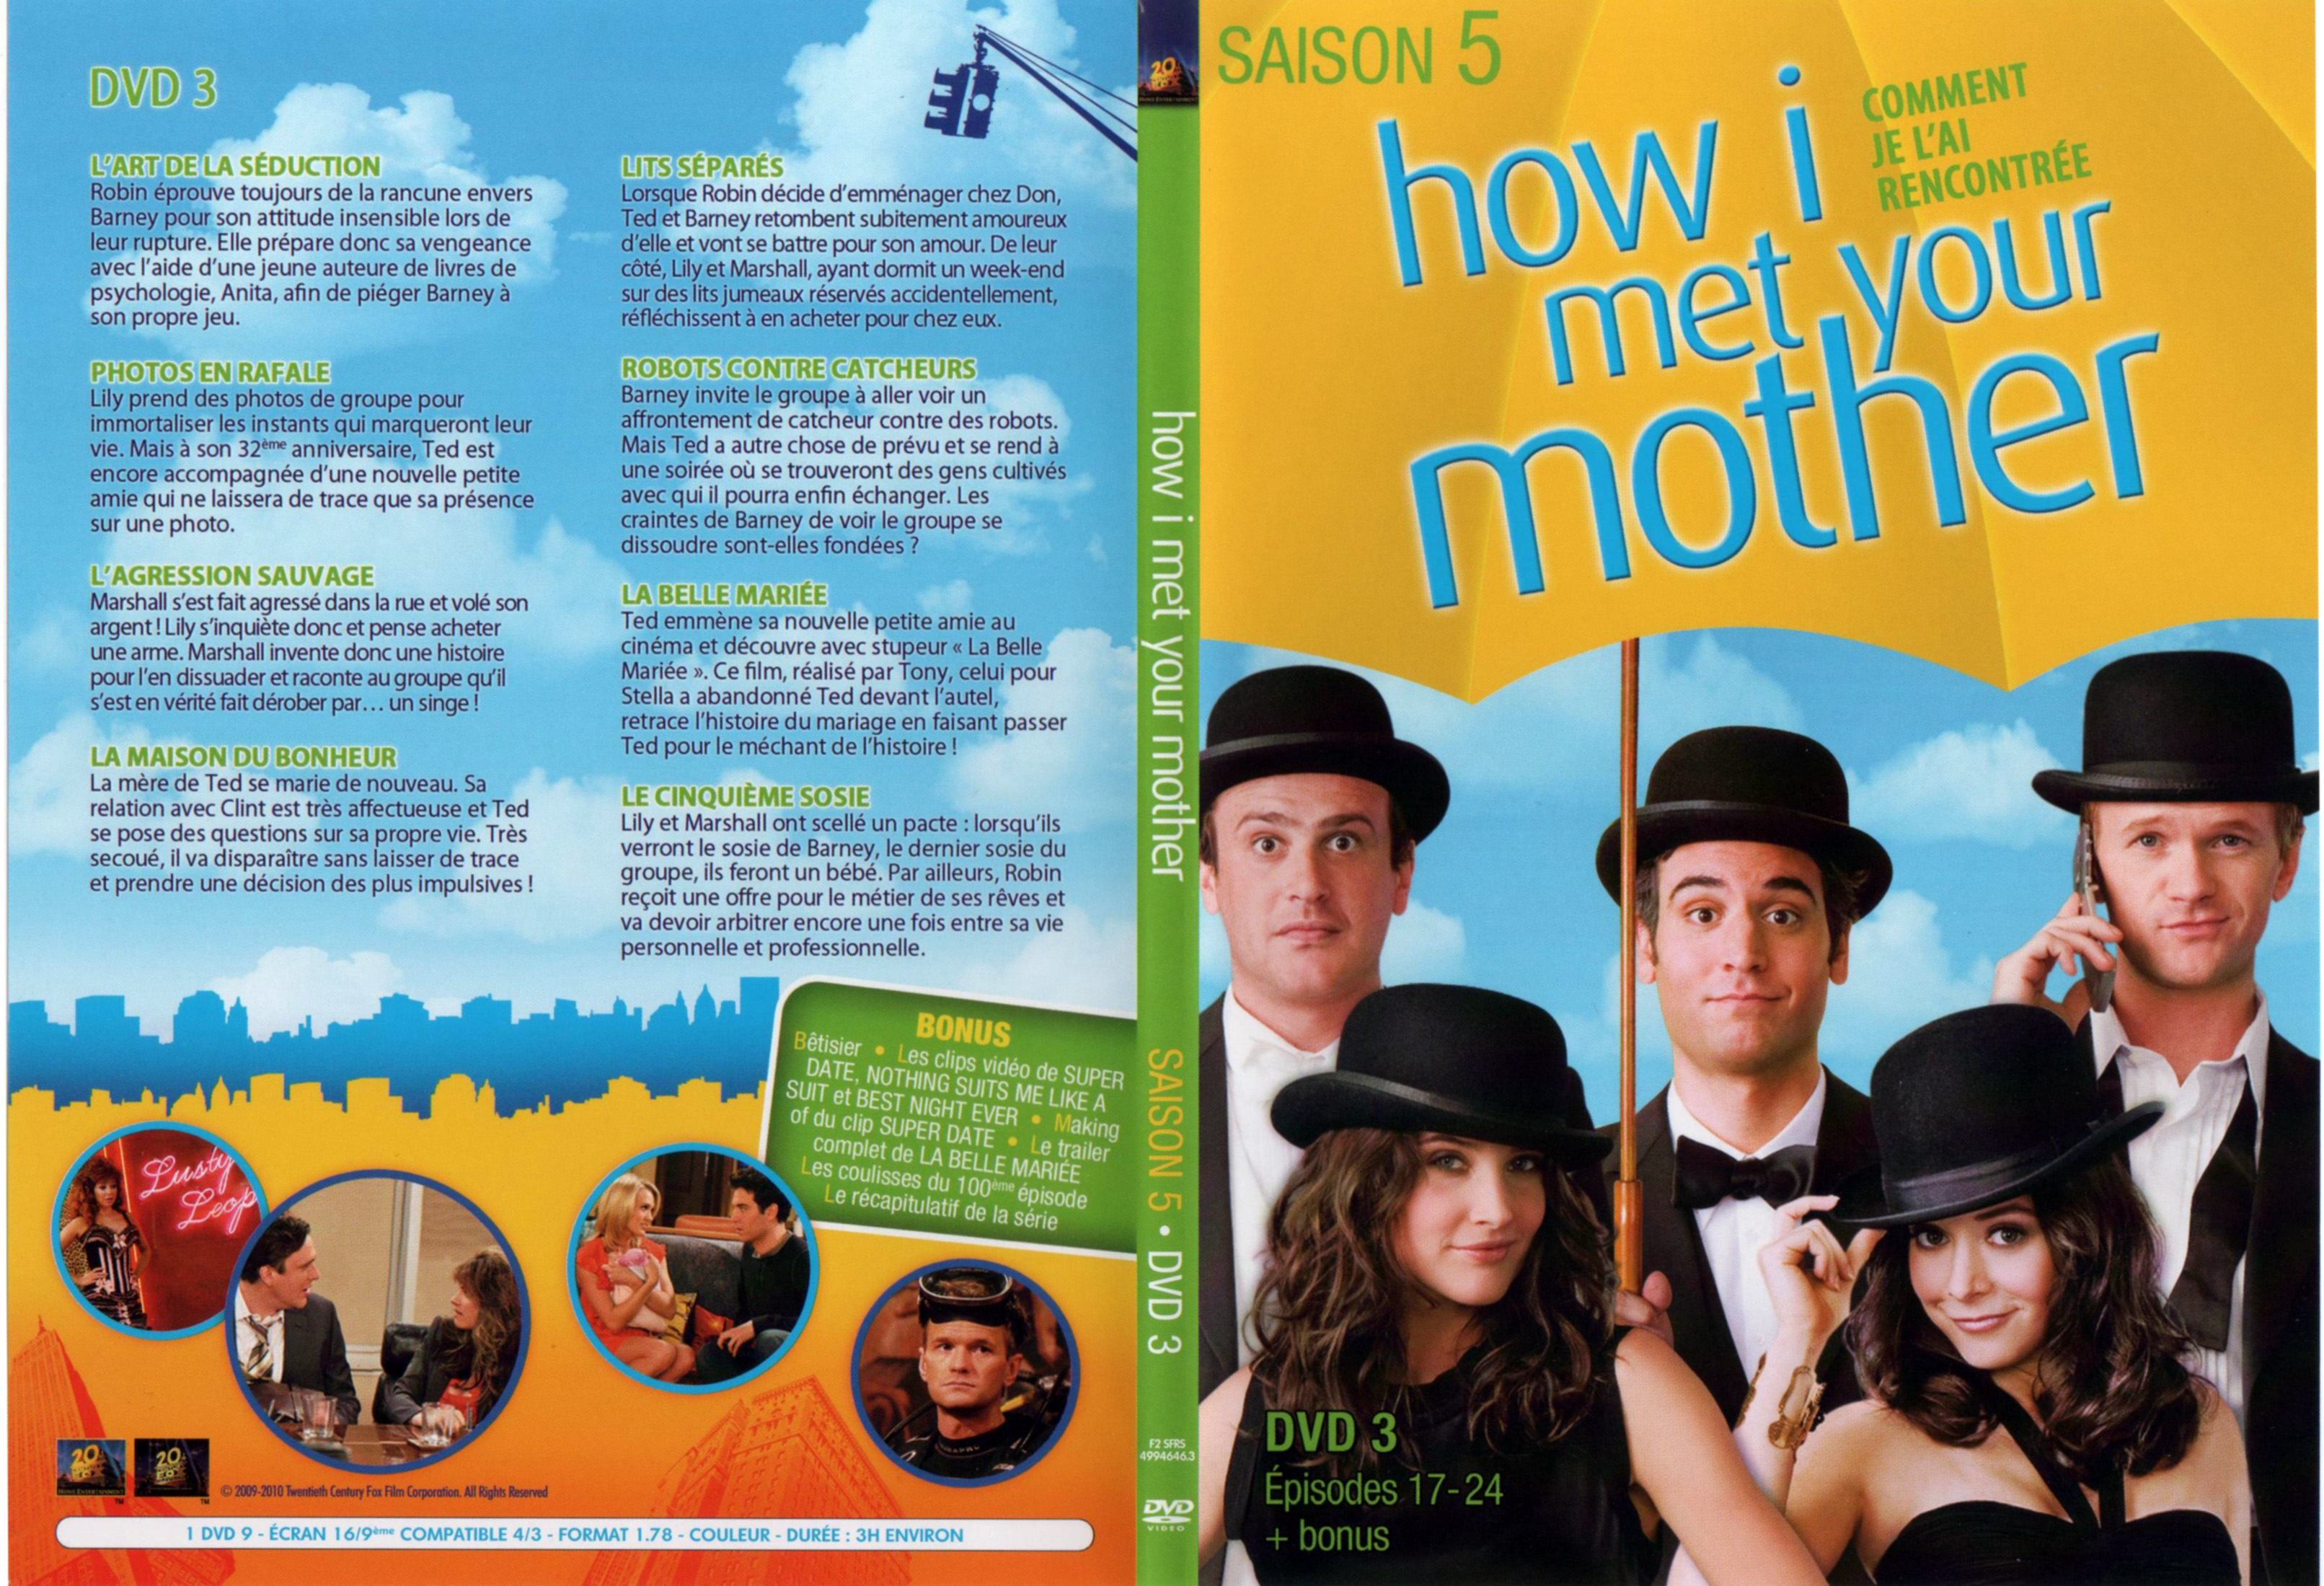 Jaquette DVD How i met your mother Saison 5 DVD 3